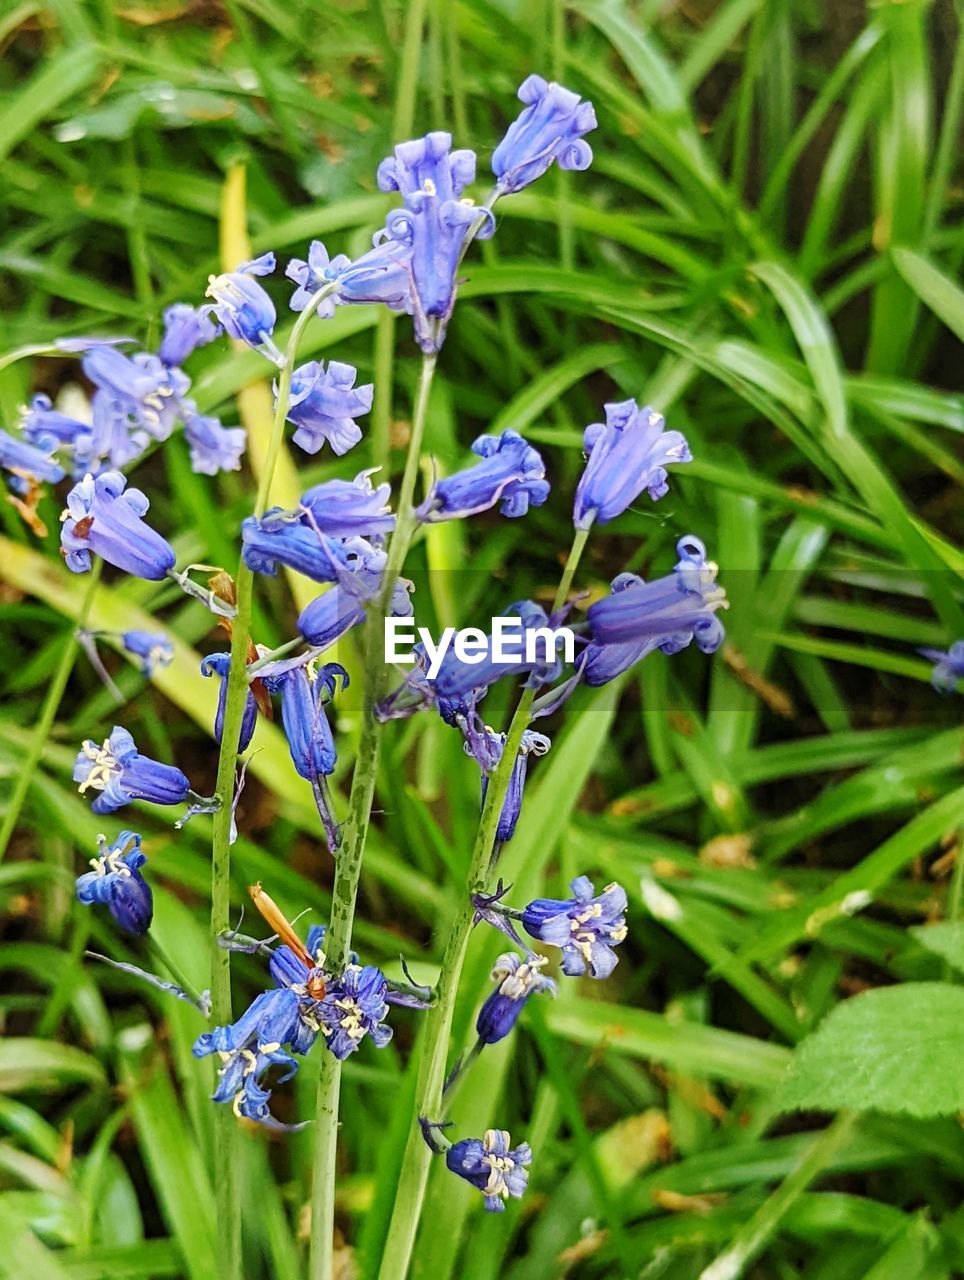 plant, flower, flowering plant, beauty in nature, freshness, purple, nature, growth, close-up, fragility, herb, green, plant part, leaf, botany, petal, no people, day, focus on foreground, animal wildlife, inflorescence, flower head, outdoors, blue, meadow, sunlight, pattern, grass, lavender